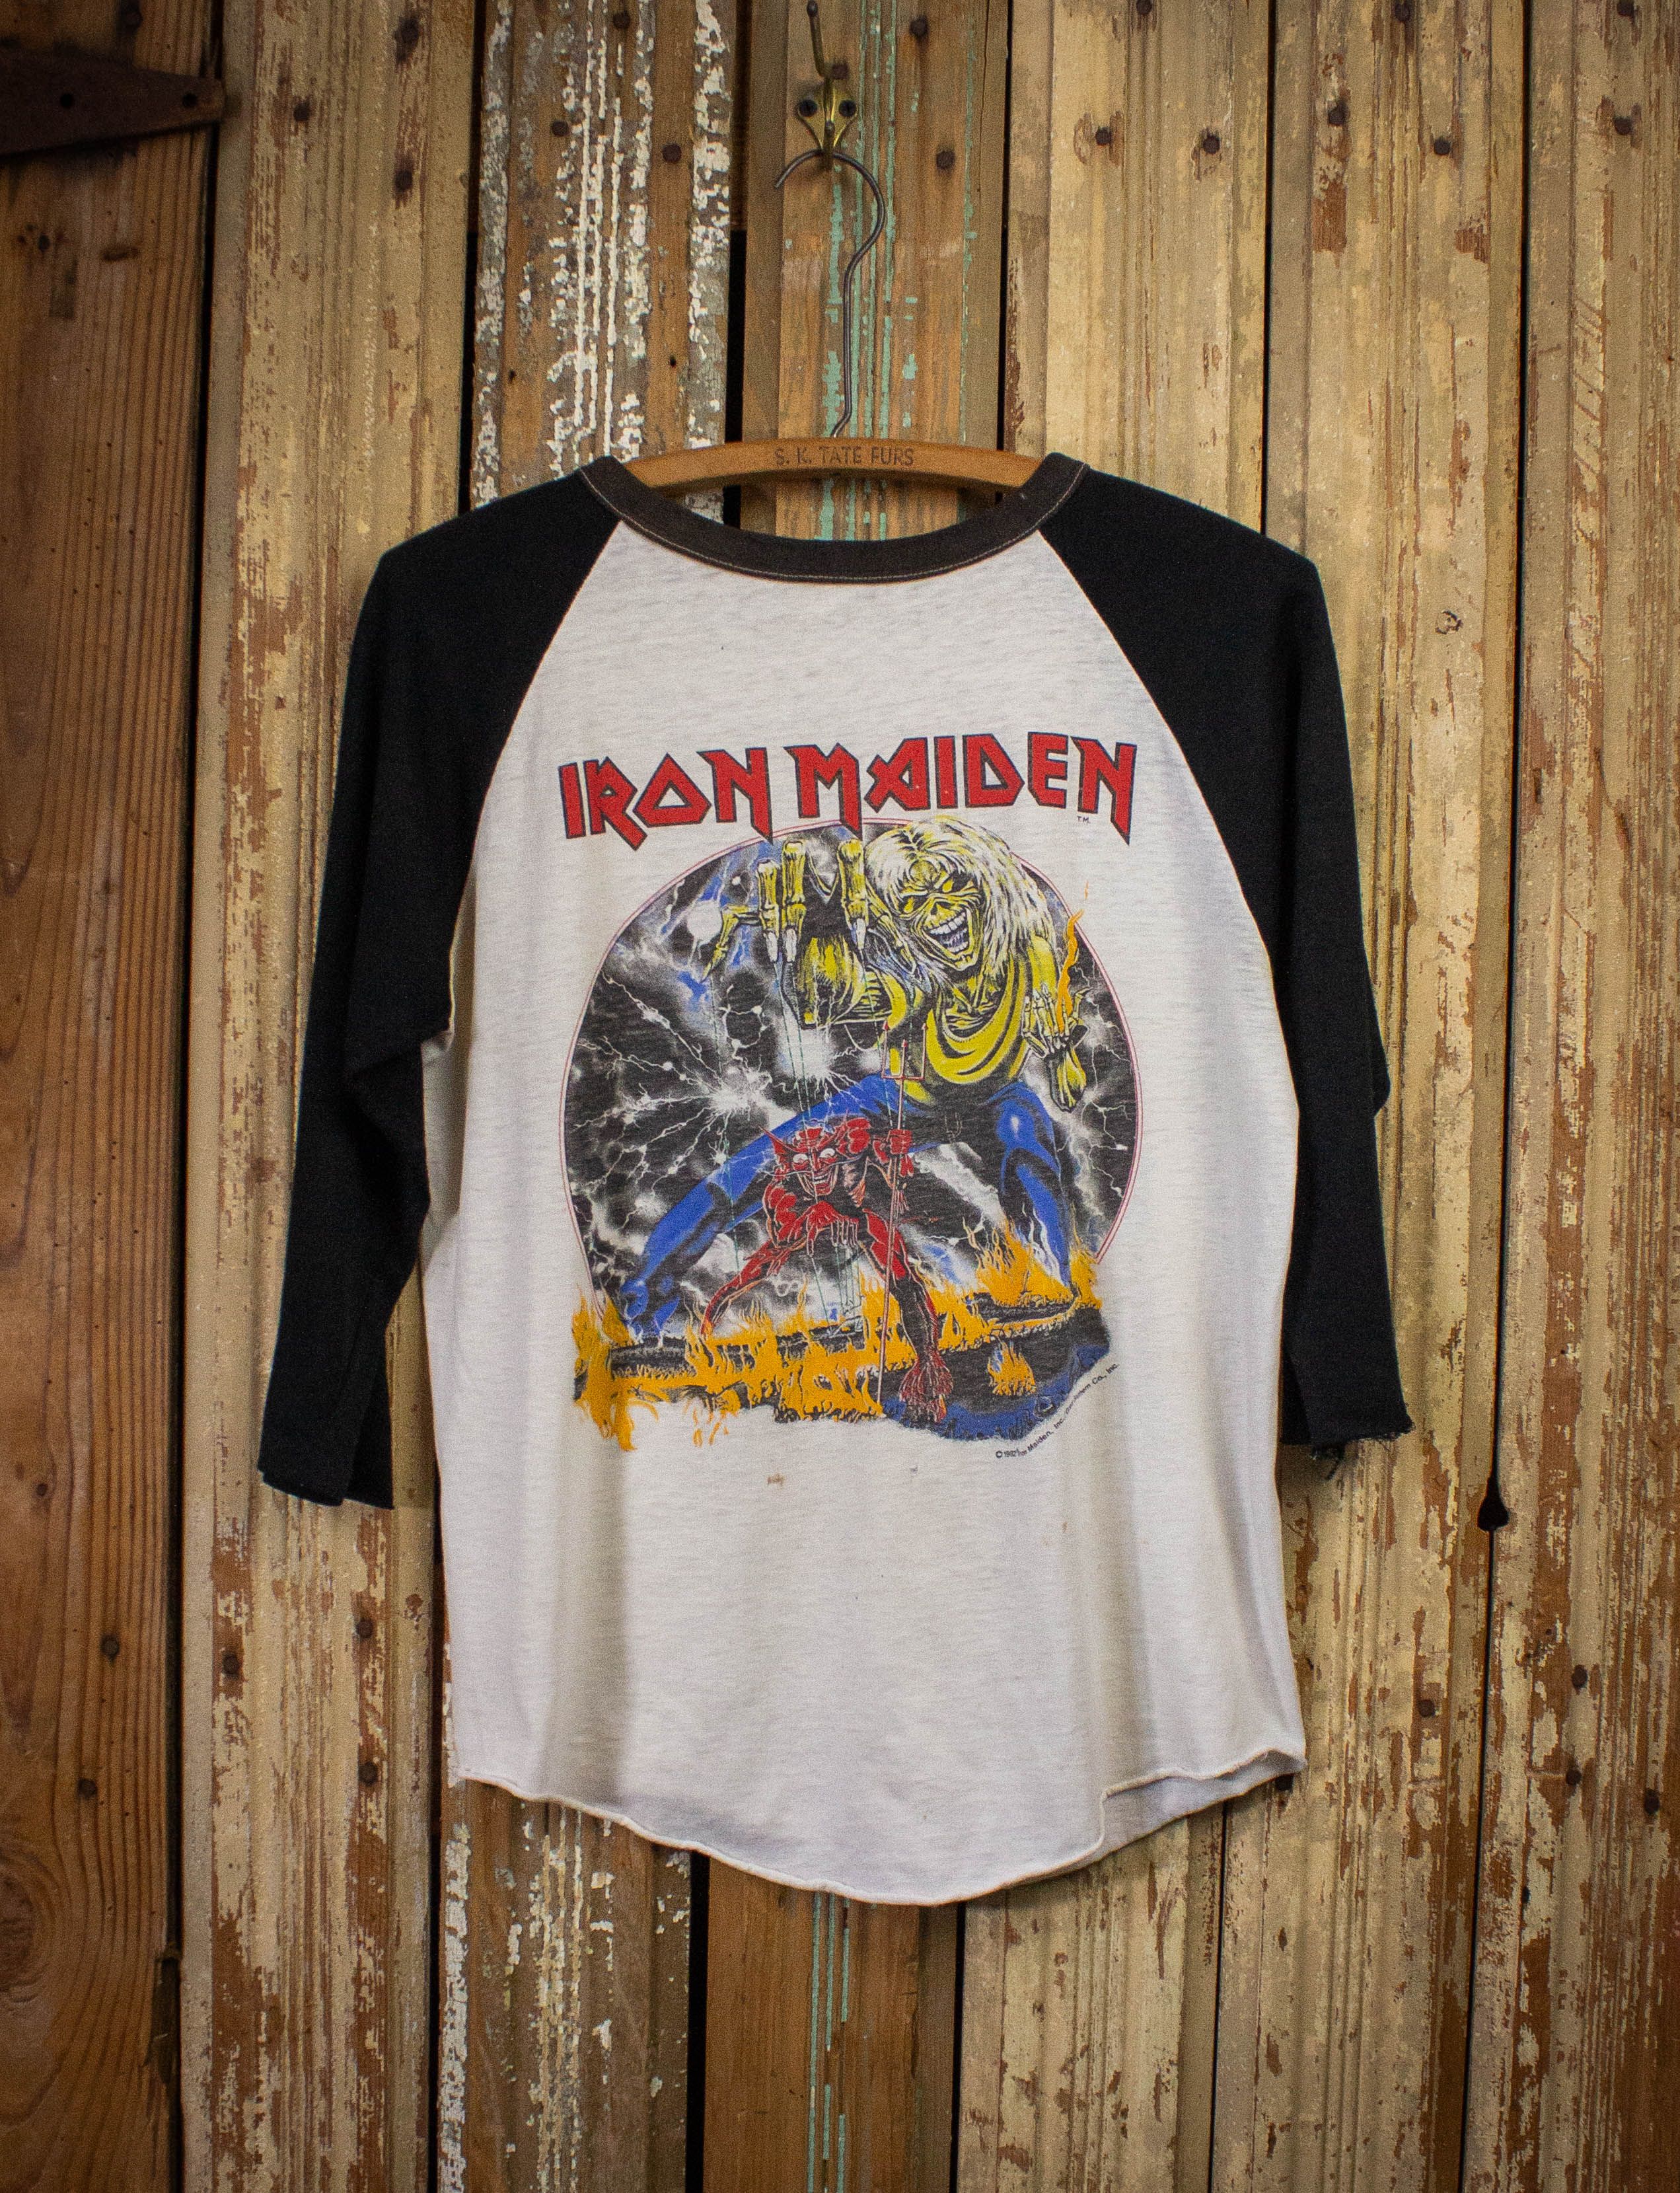 Vintage Iron Maiden 1982 The Number of The Beast Tour Raglan T Shirt Size US M / EU 48-50 / 2 - 1 Preview